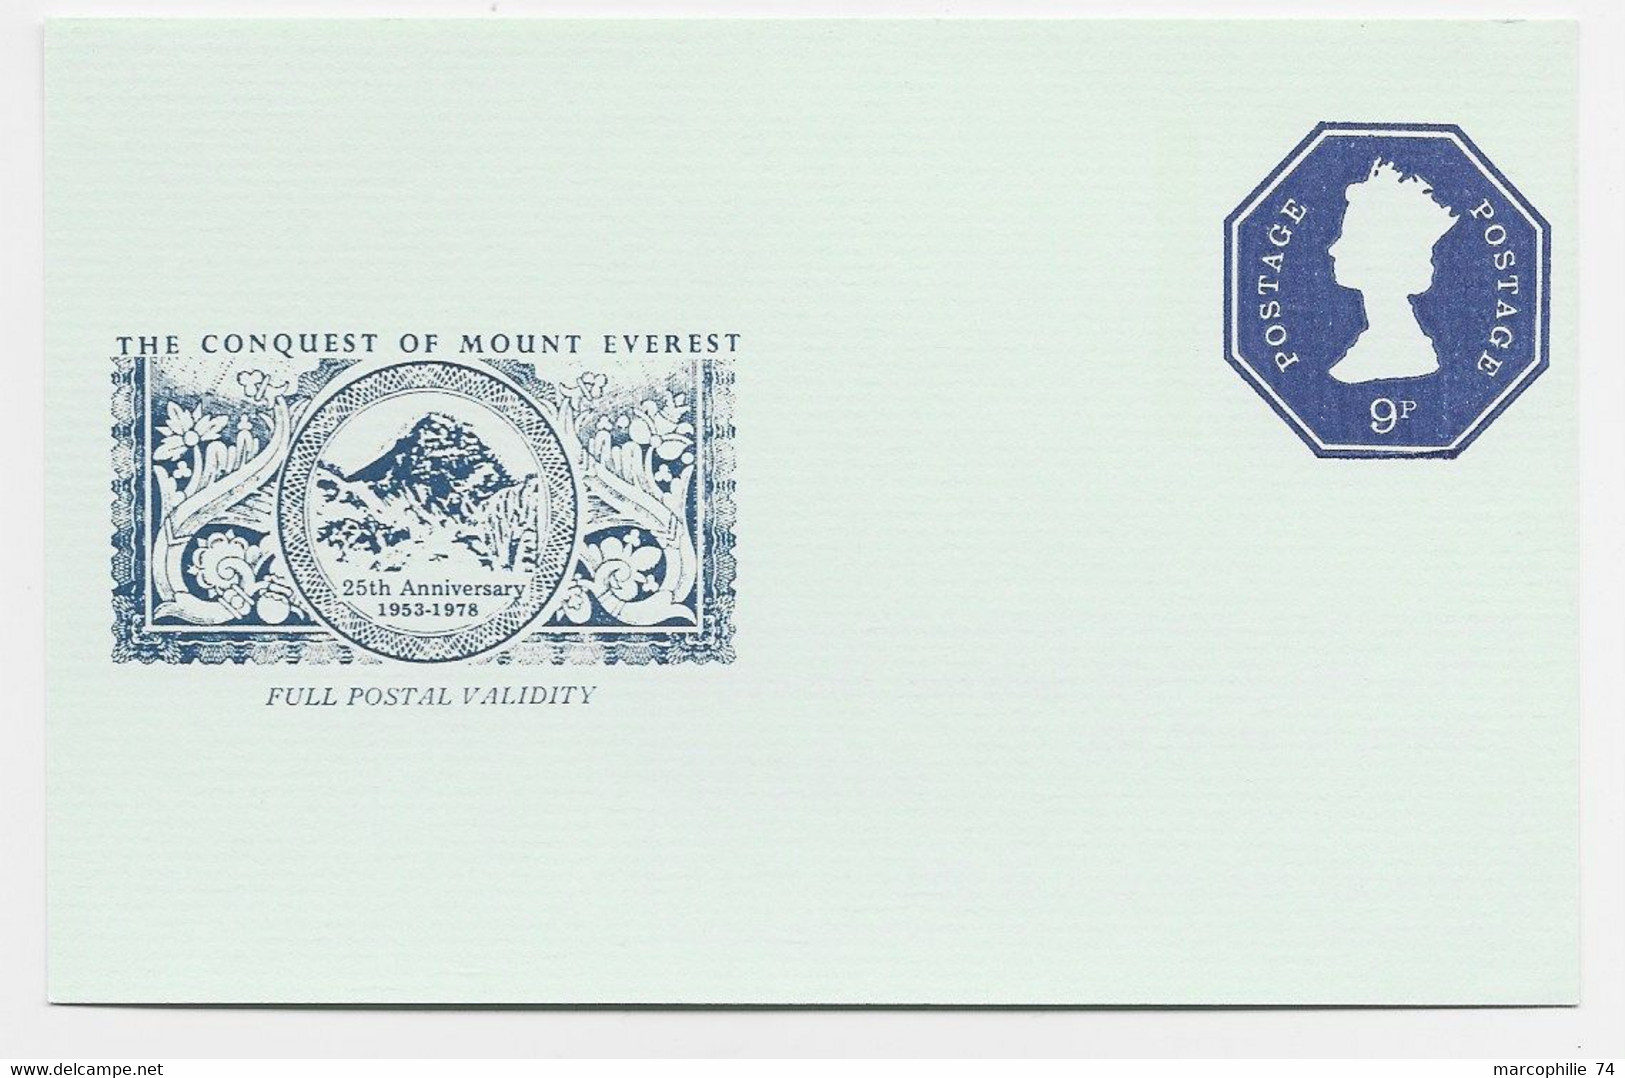 ENGLAND ENTIER POST CARD 9P THE CONQUEST MOUNT EVEREST EXPEDITION HIMALAYA 25TH ANNIVERSARY 1953 .1978 TIRAGE 500 - Escalada